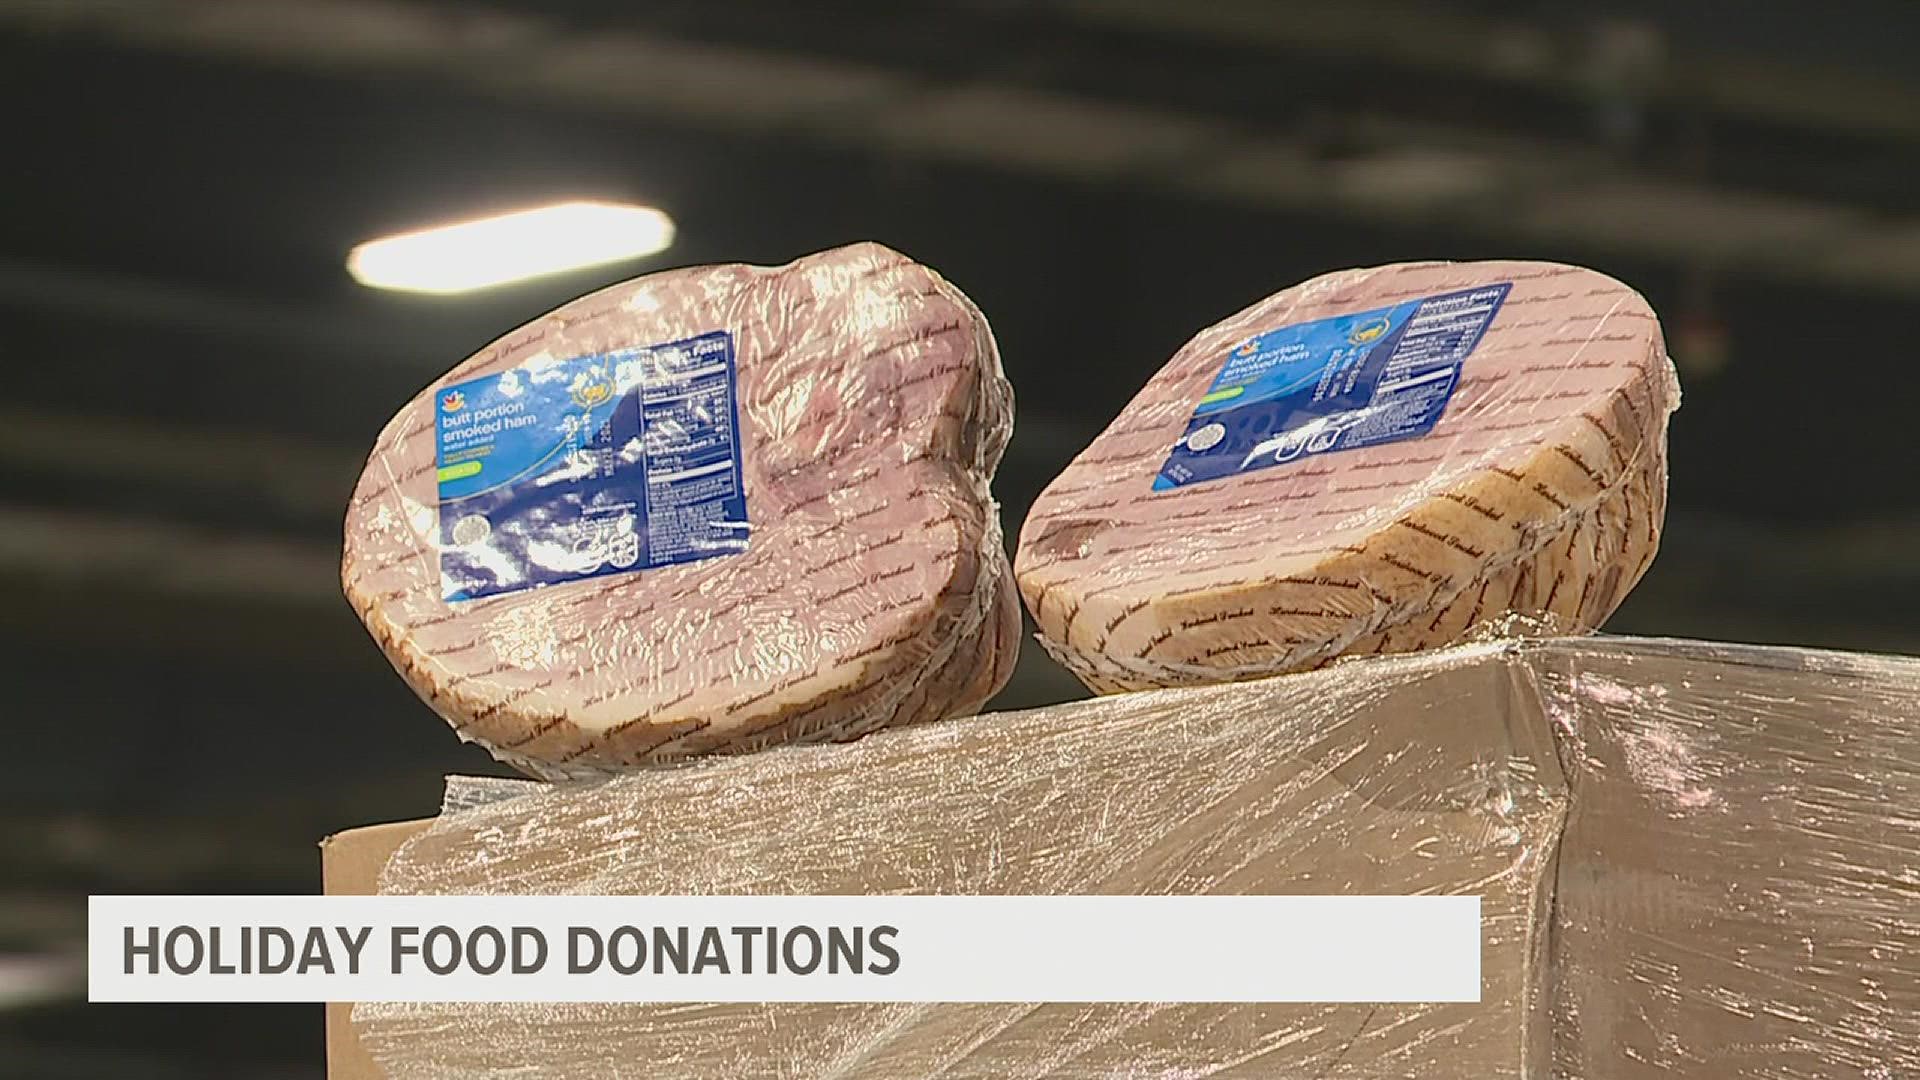 Volunteers along with the GIANT Company team members will pack meals including 500 hams to donate to families.